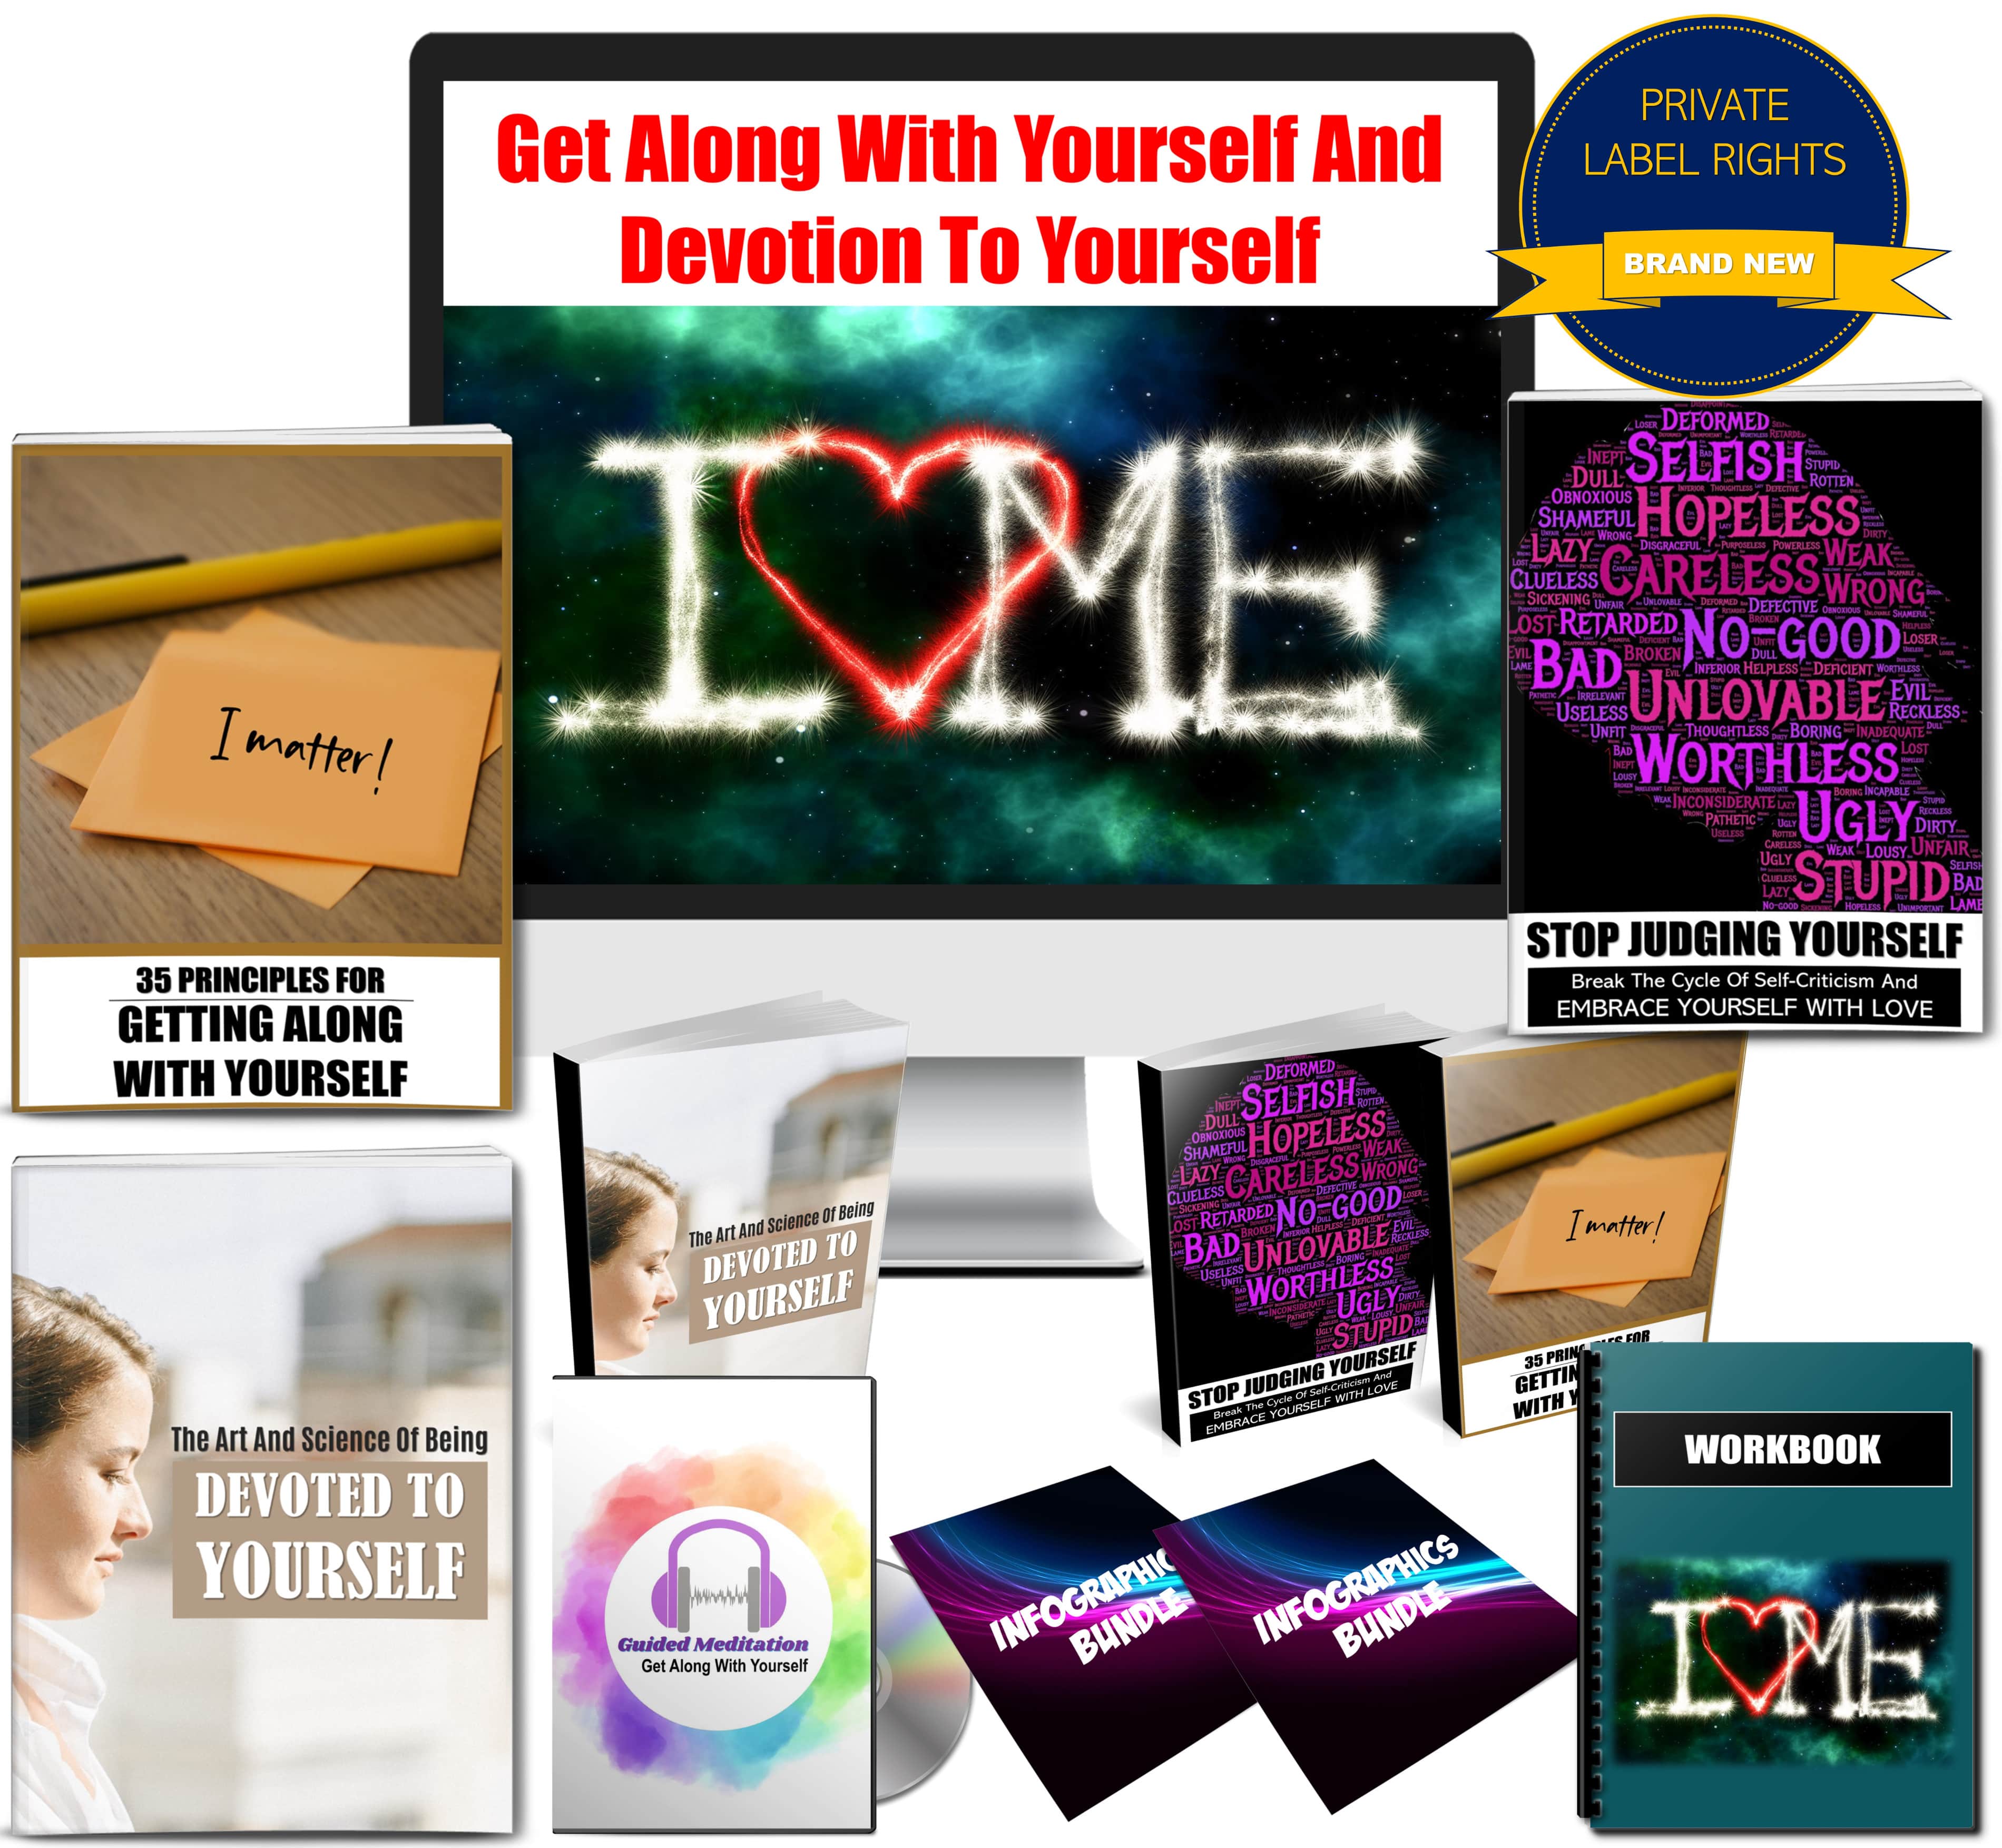 Get Along With Yourself And Devotion To Yourself Content Pack With PLR Rights